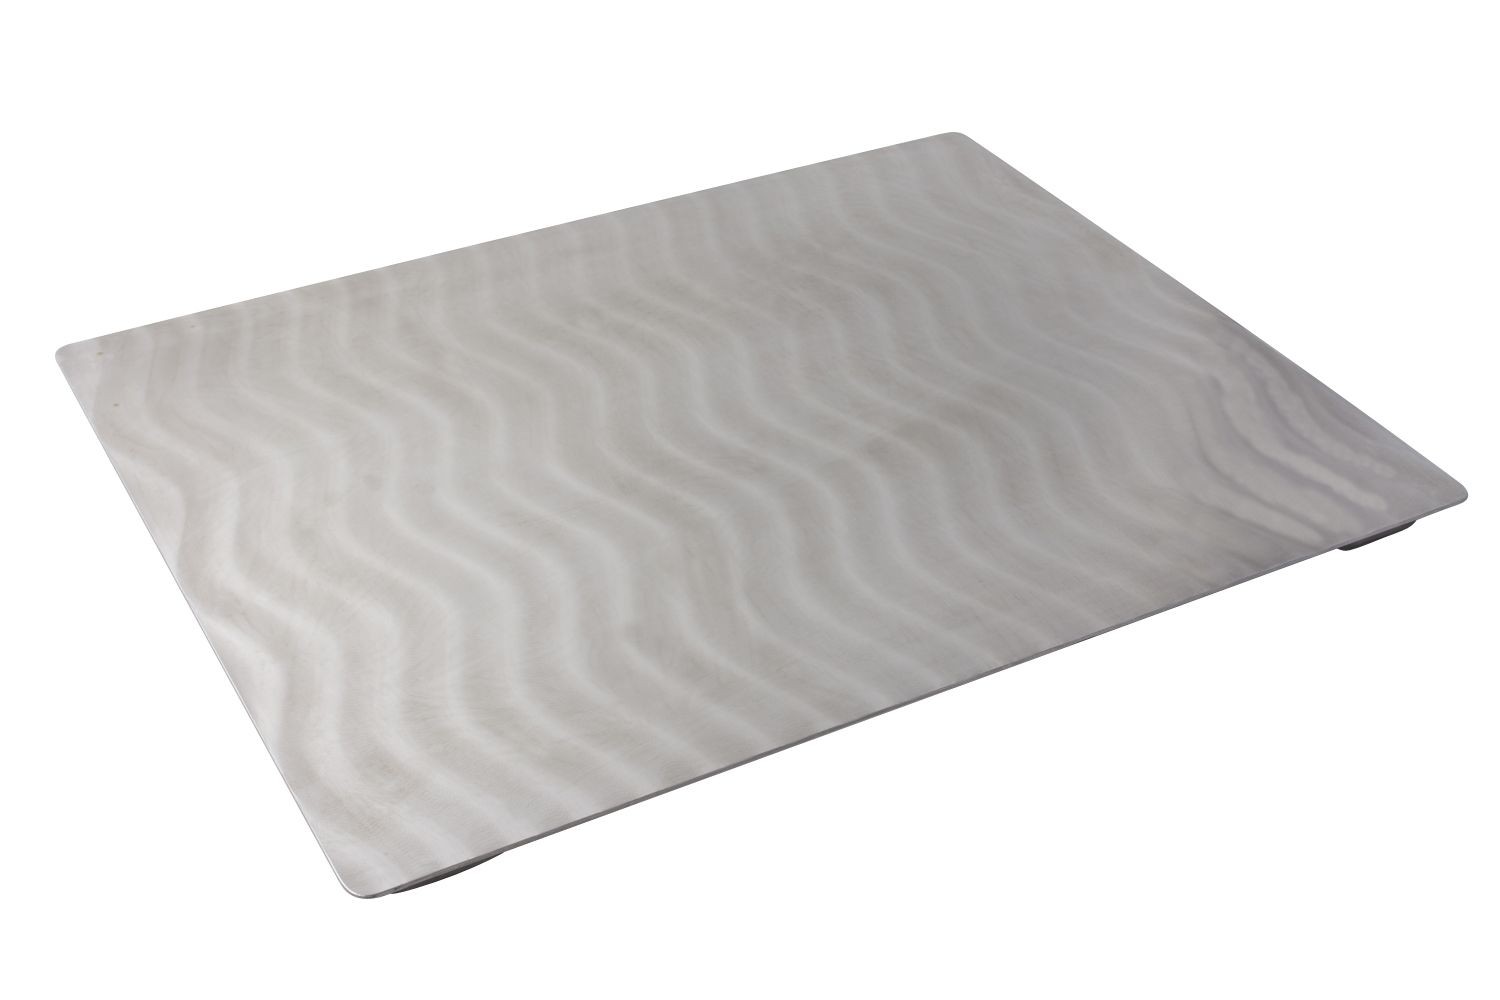 Bon Chef 52108 EZ Fit Stainless Steel Double Size Tile with Swirls, 25 1/2" x 20 13/16"